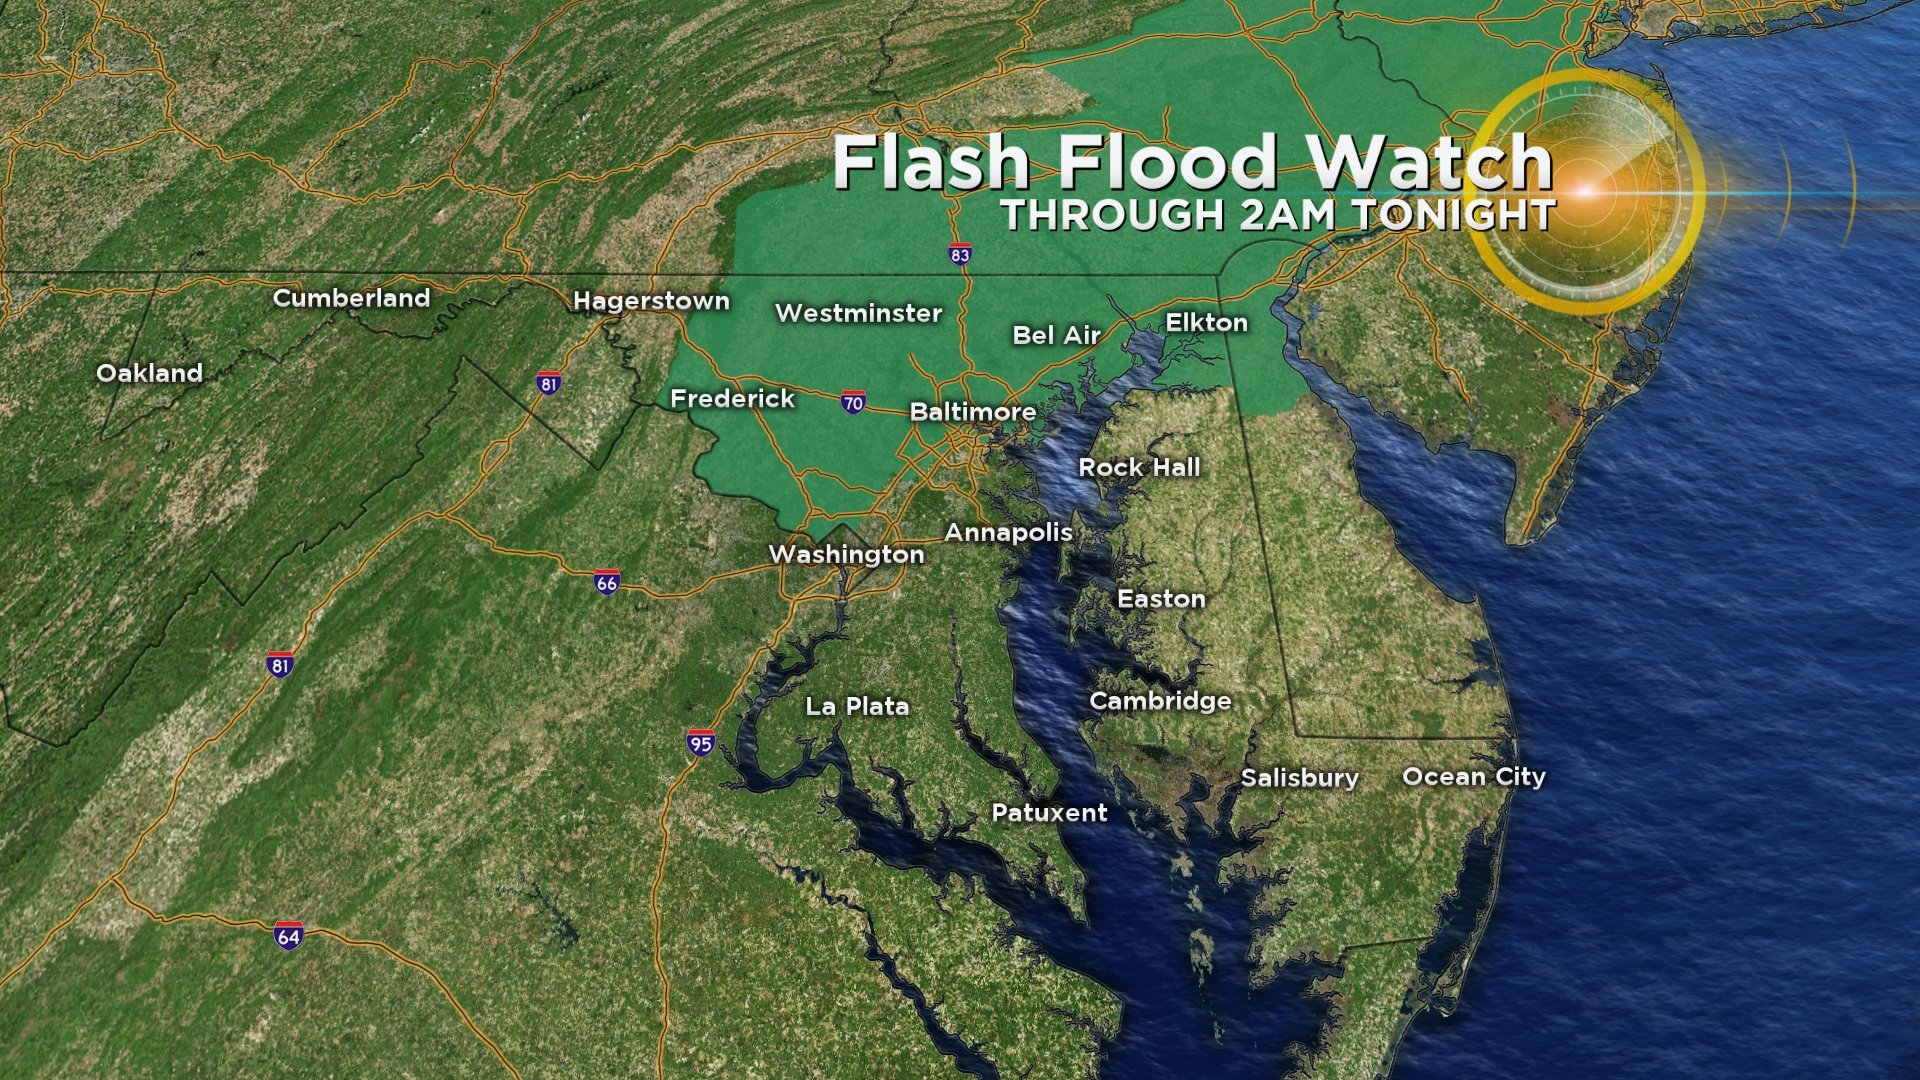 Maryland Weather: Severe Thunderstorm & Flash Flood Watches, Warnings Issued For Areas Across Region - CBS Baltimore